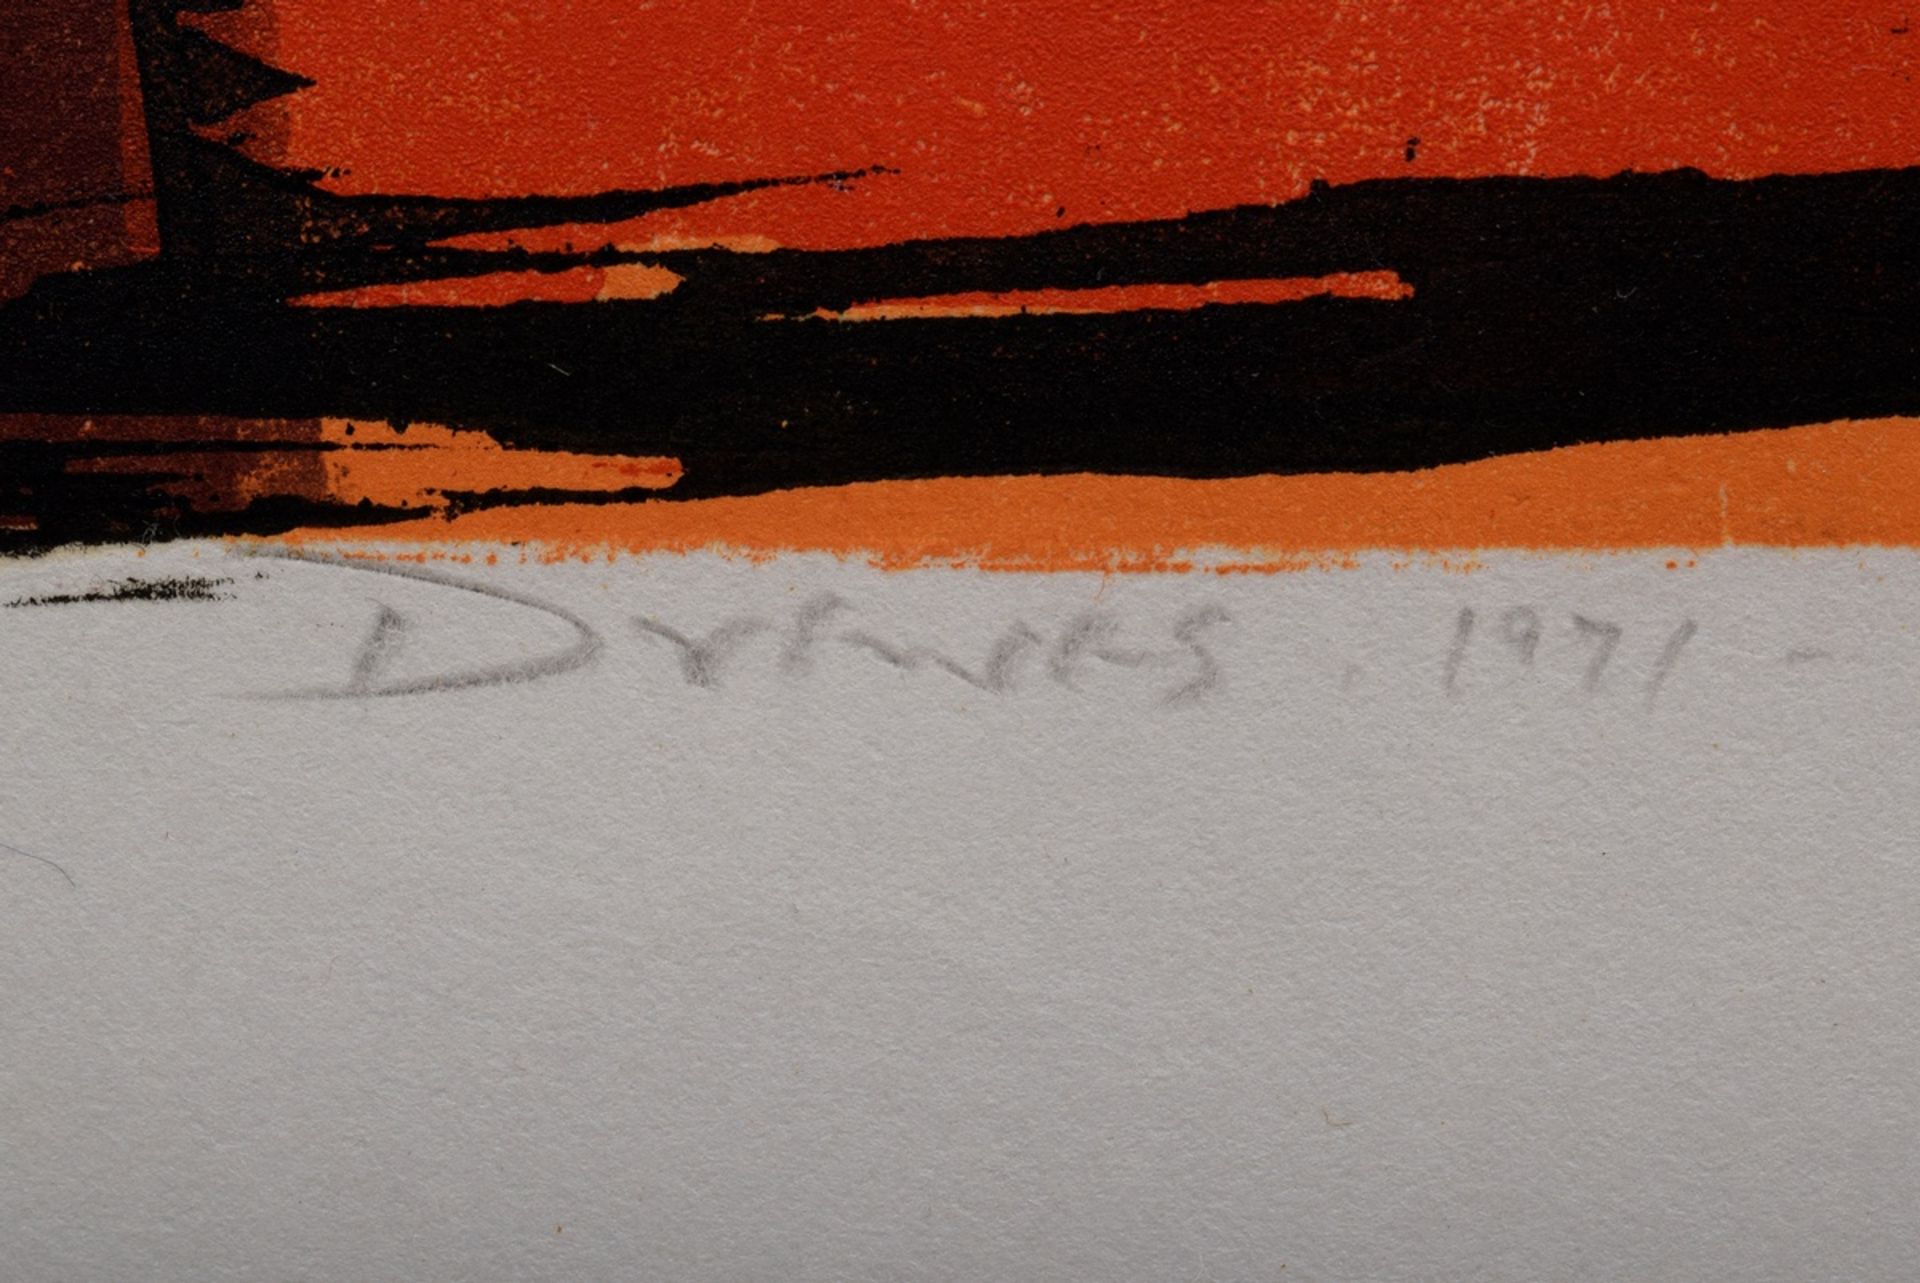 Drewes, Werner (1899-1985) "Lot|s Wife" 1971, color woodcut, 9/30, b. sign./dat./num./titl., cat. r - Image 3 of 3